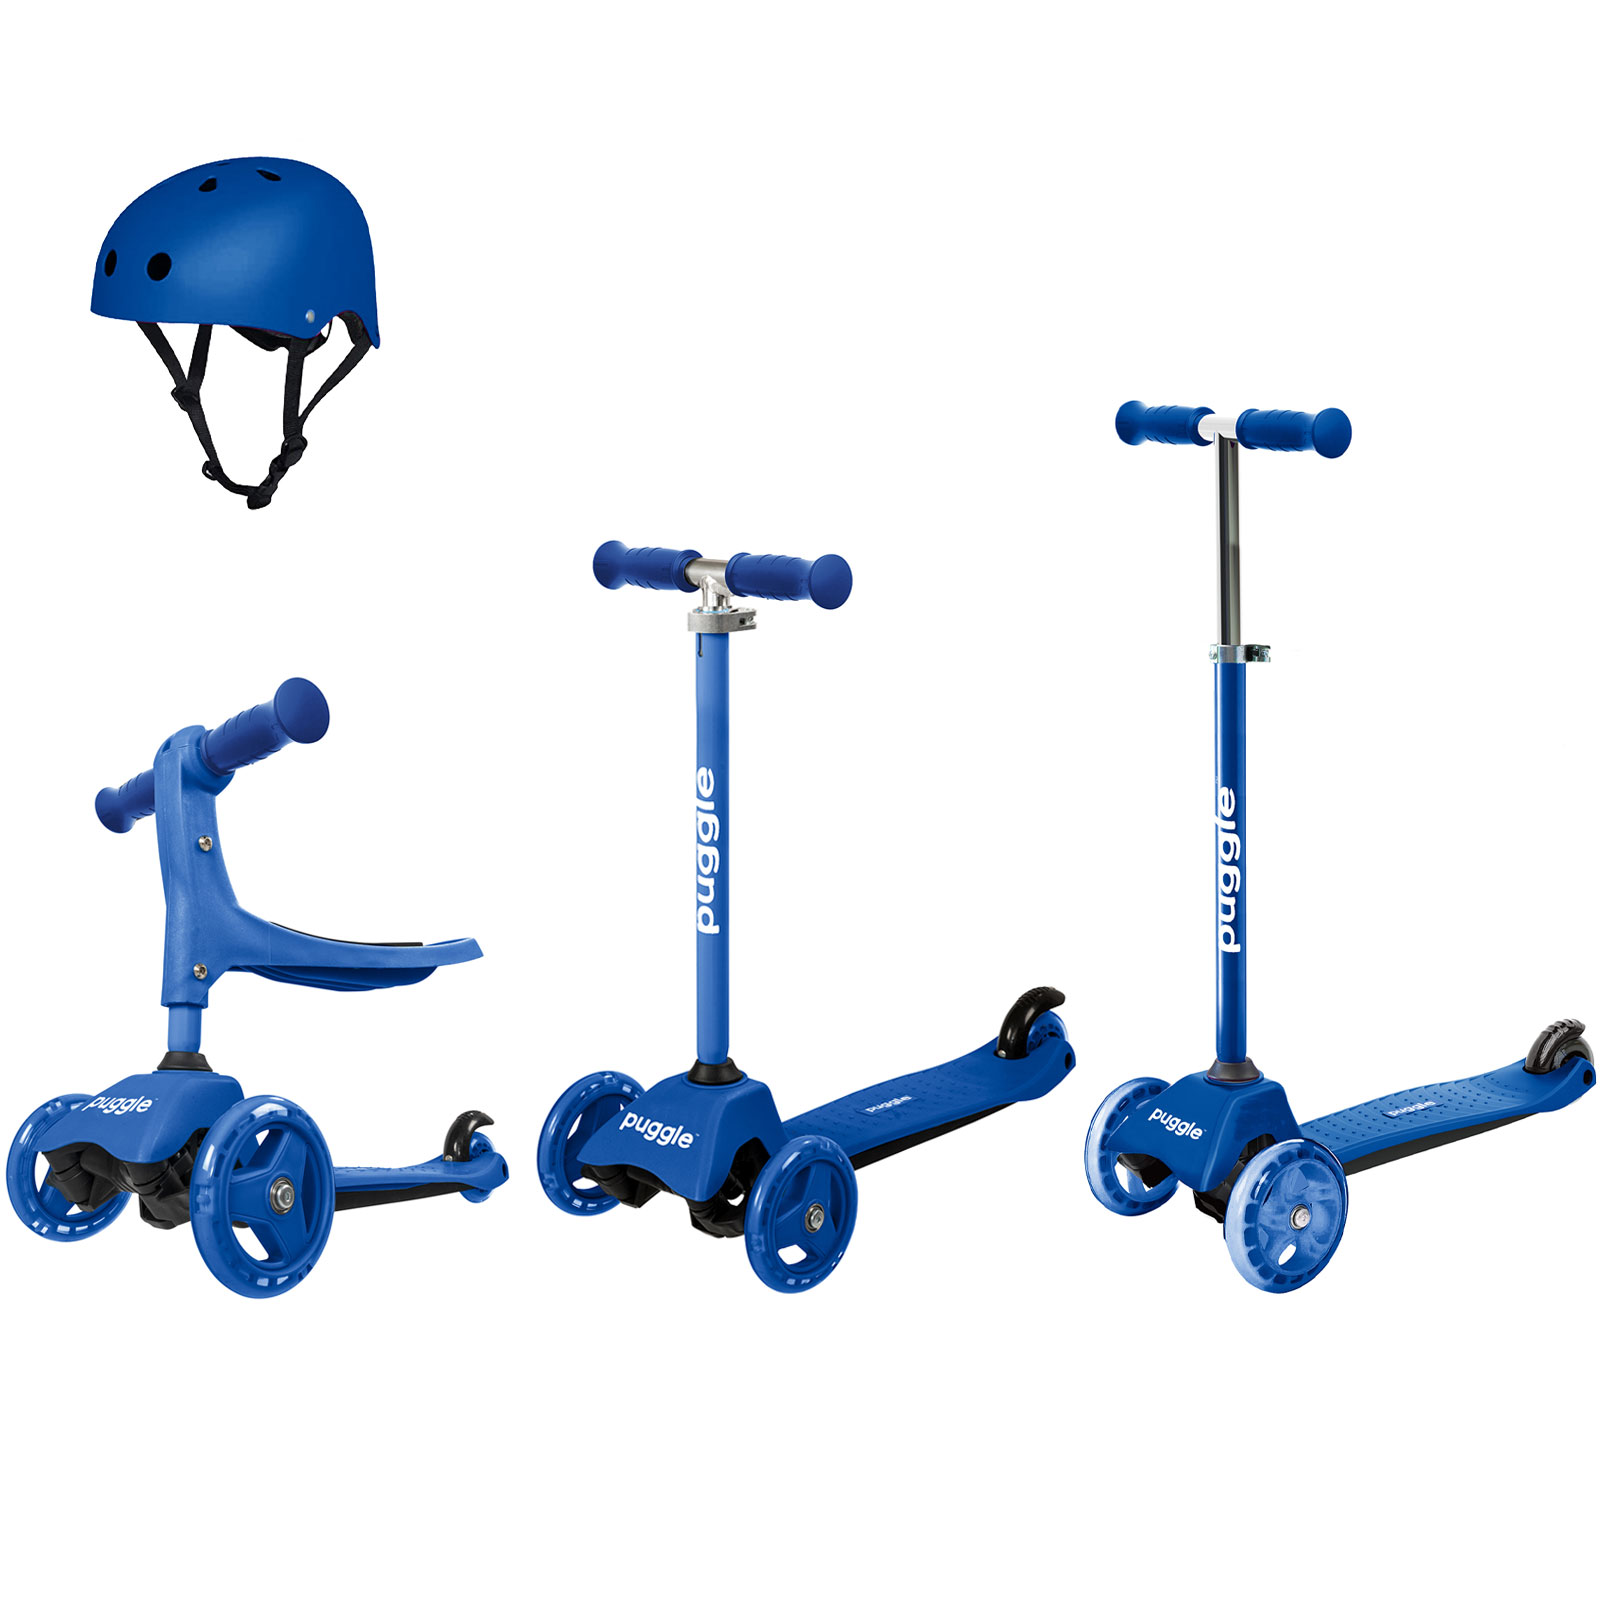 Puggle 3in1 Grow with Me 3-Wheeled Scooter with Helmet – Blue (12m – 10yrs)